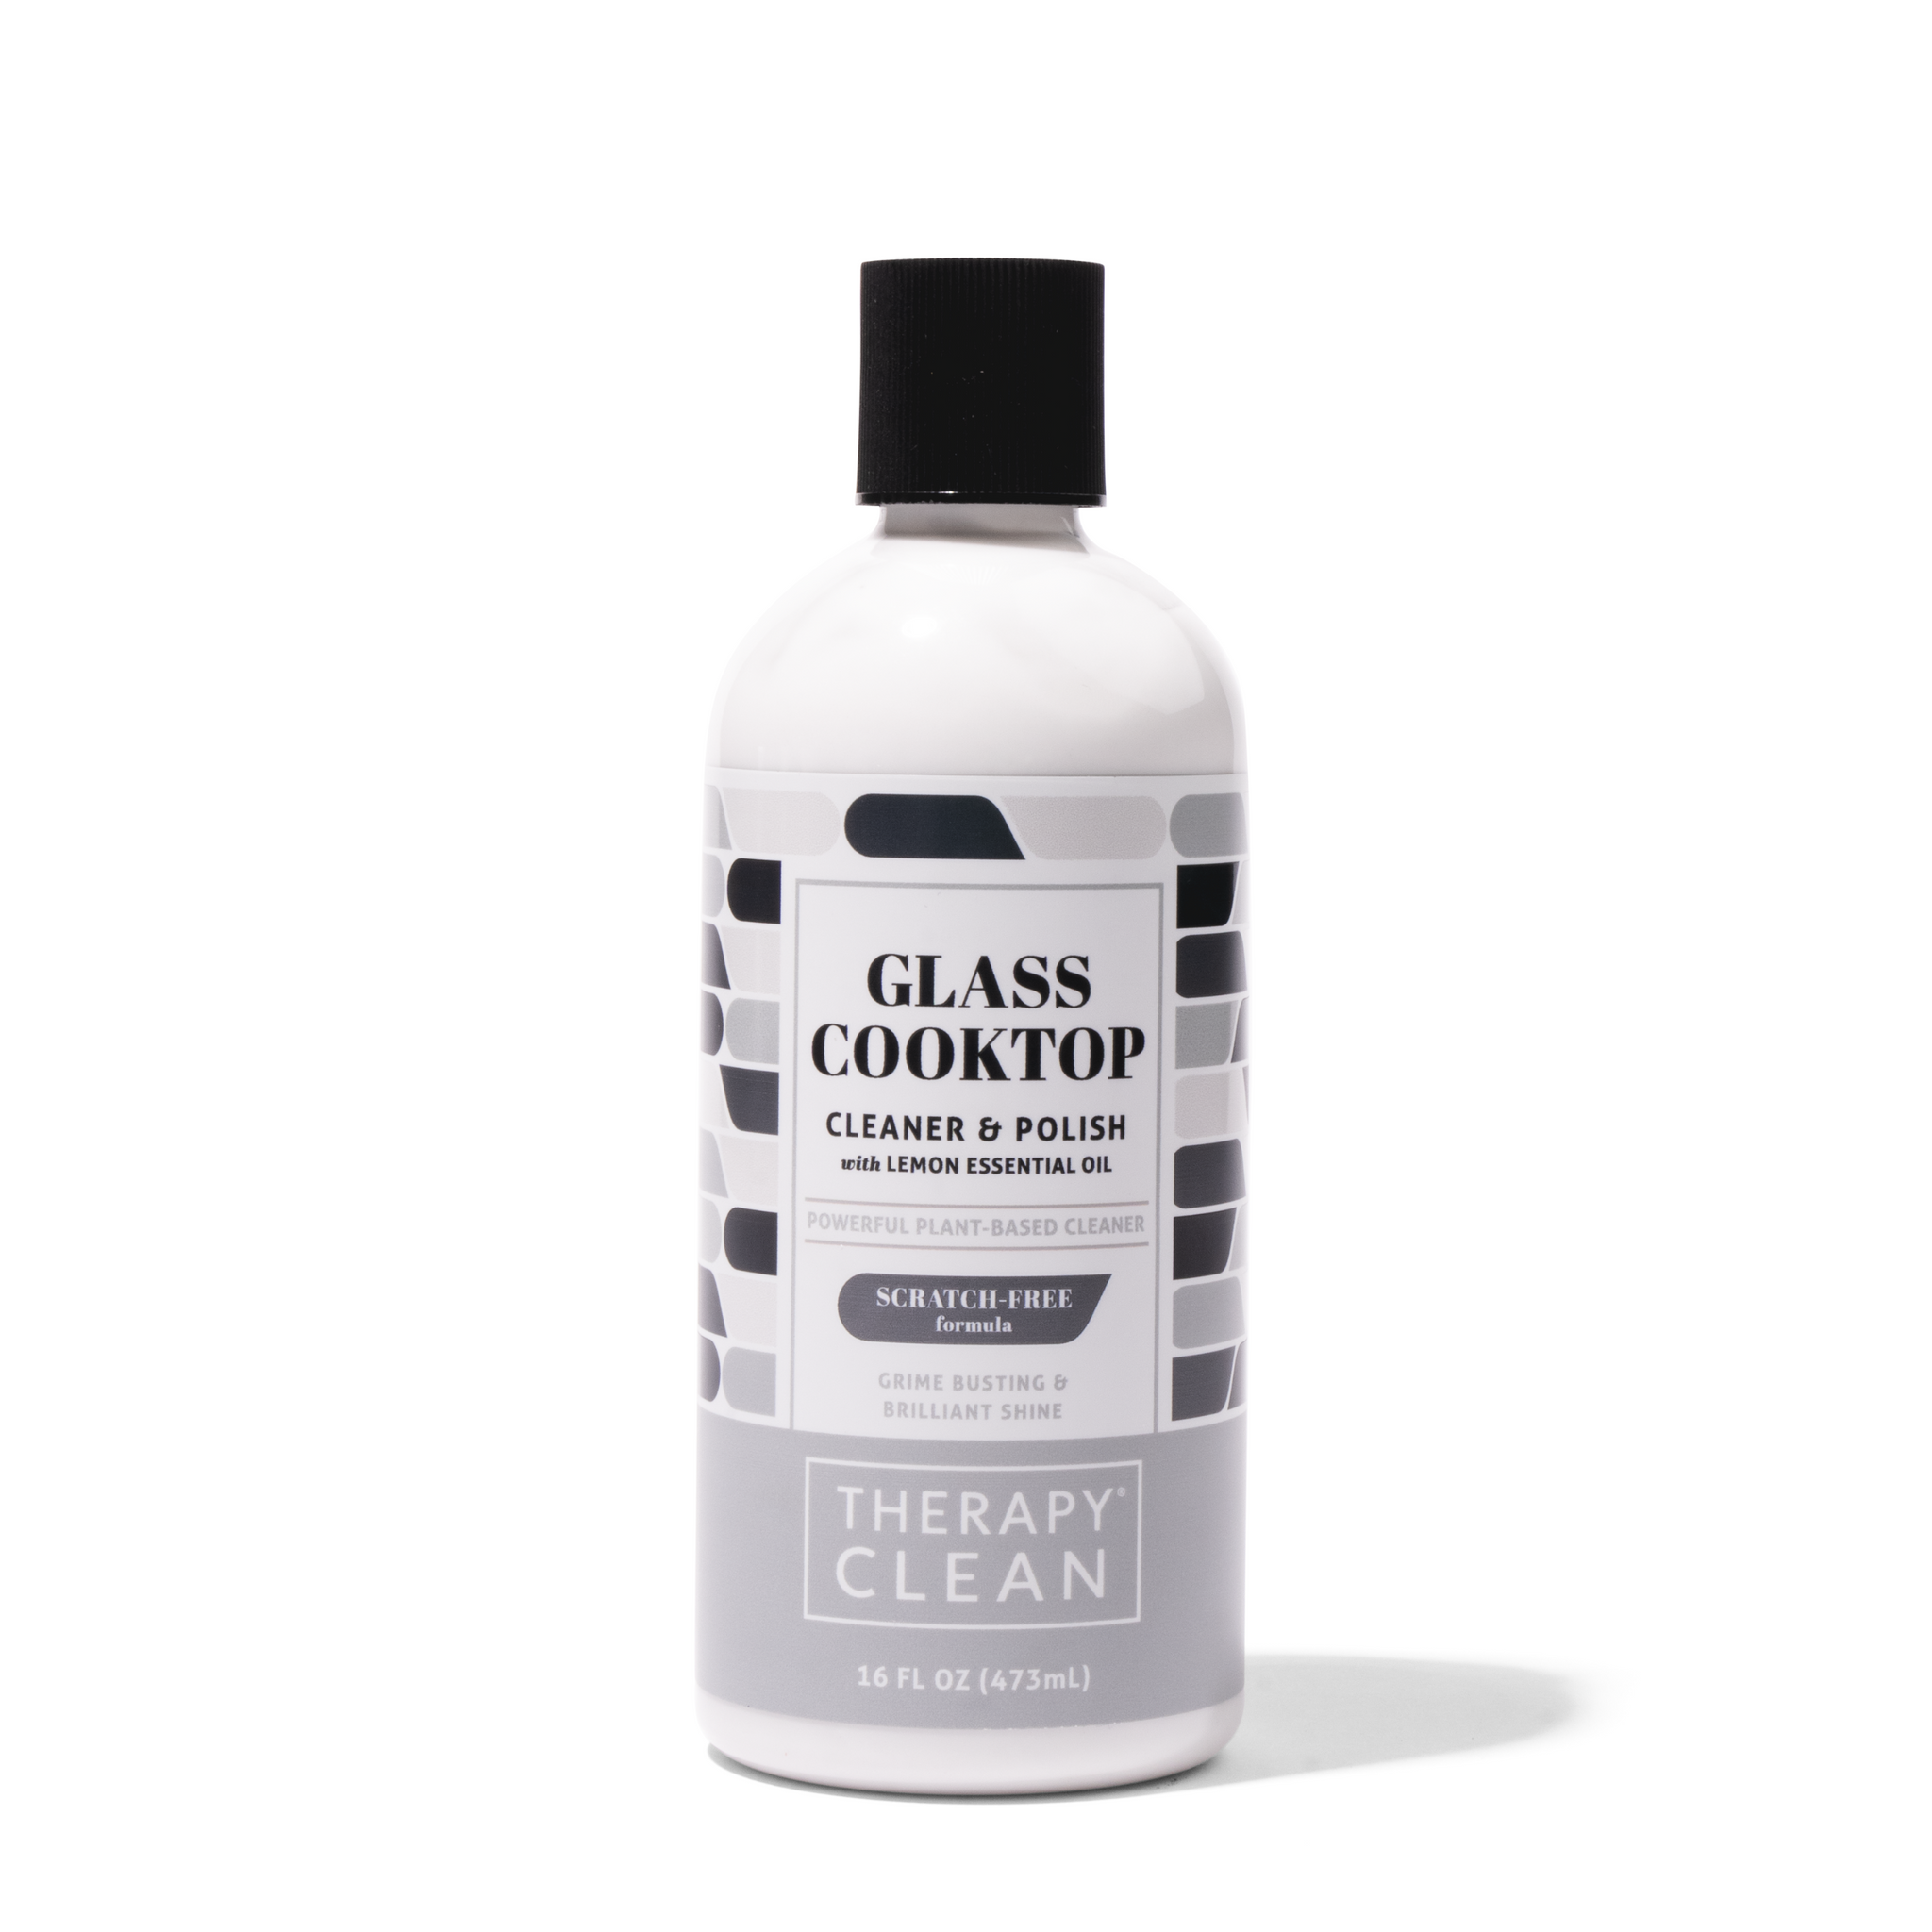 Glass Cooktop Cleaner and Polish 13,52 Fl Oz - Induction Cooktop Hob Cleaner  - Degreaser Cleaner Heavy Duty - Glass Stovetop Cleaner Safely Cleans  without Scratches - Glass Top Stove Cleaner